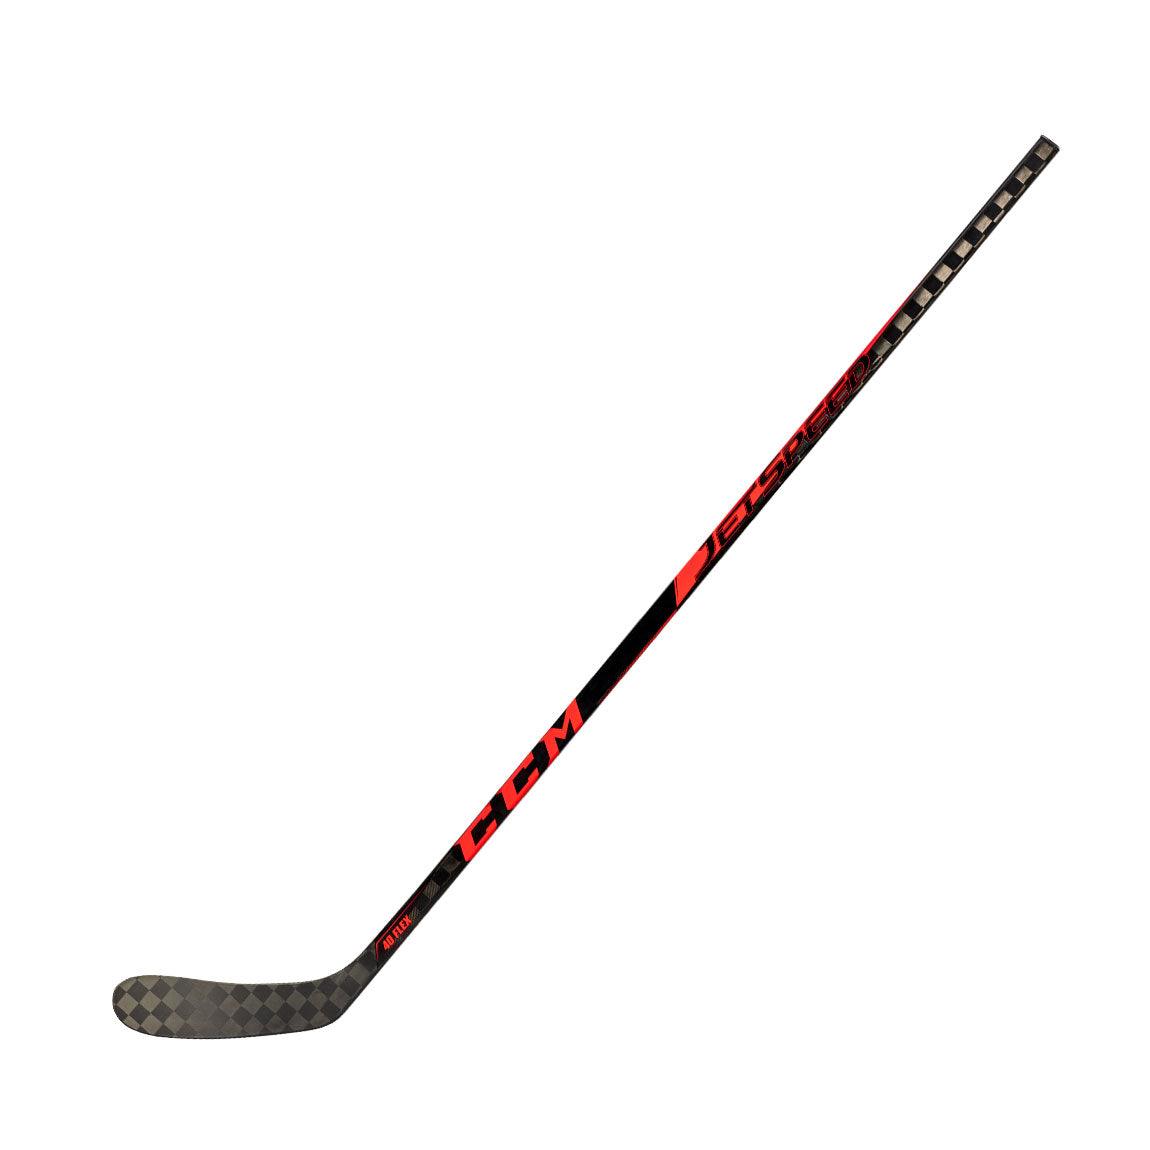 Jetspeed 40 Youth Hockey Stick - Youth - Sports Excellence